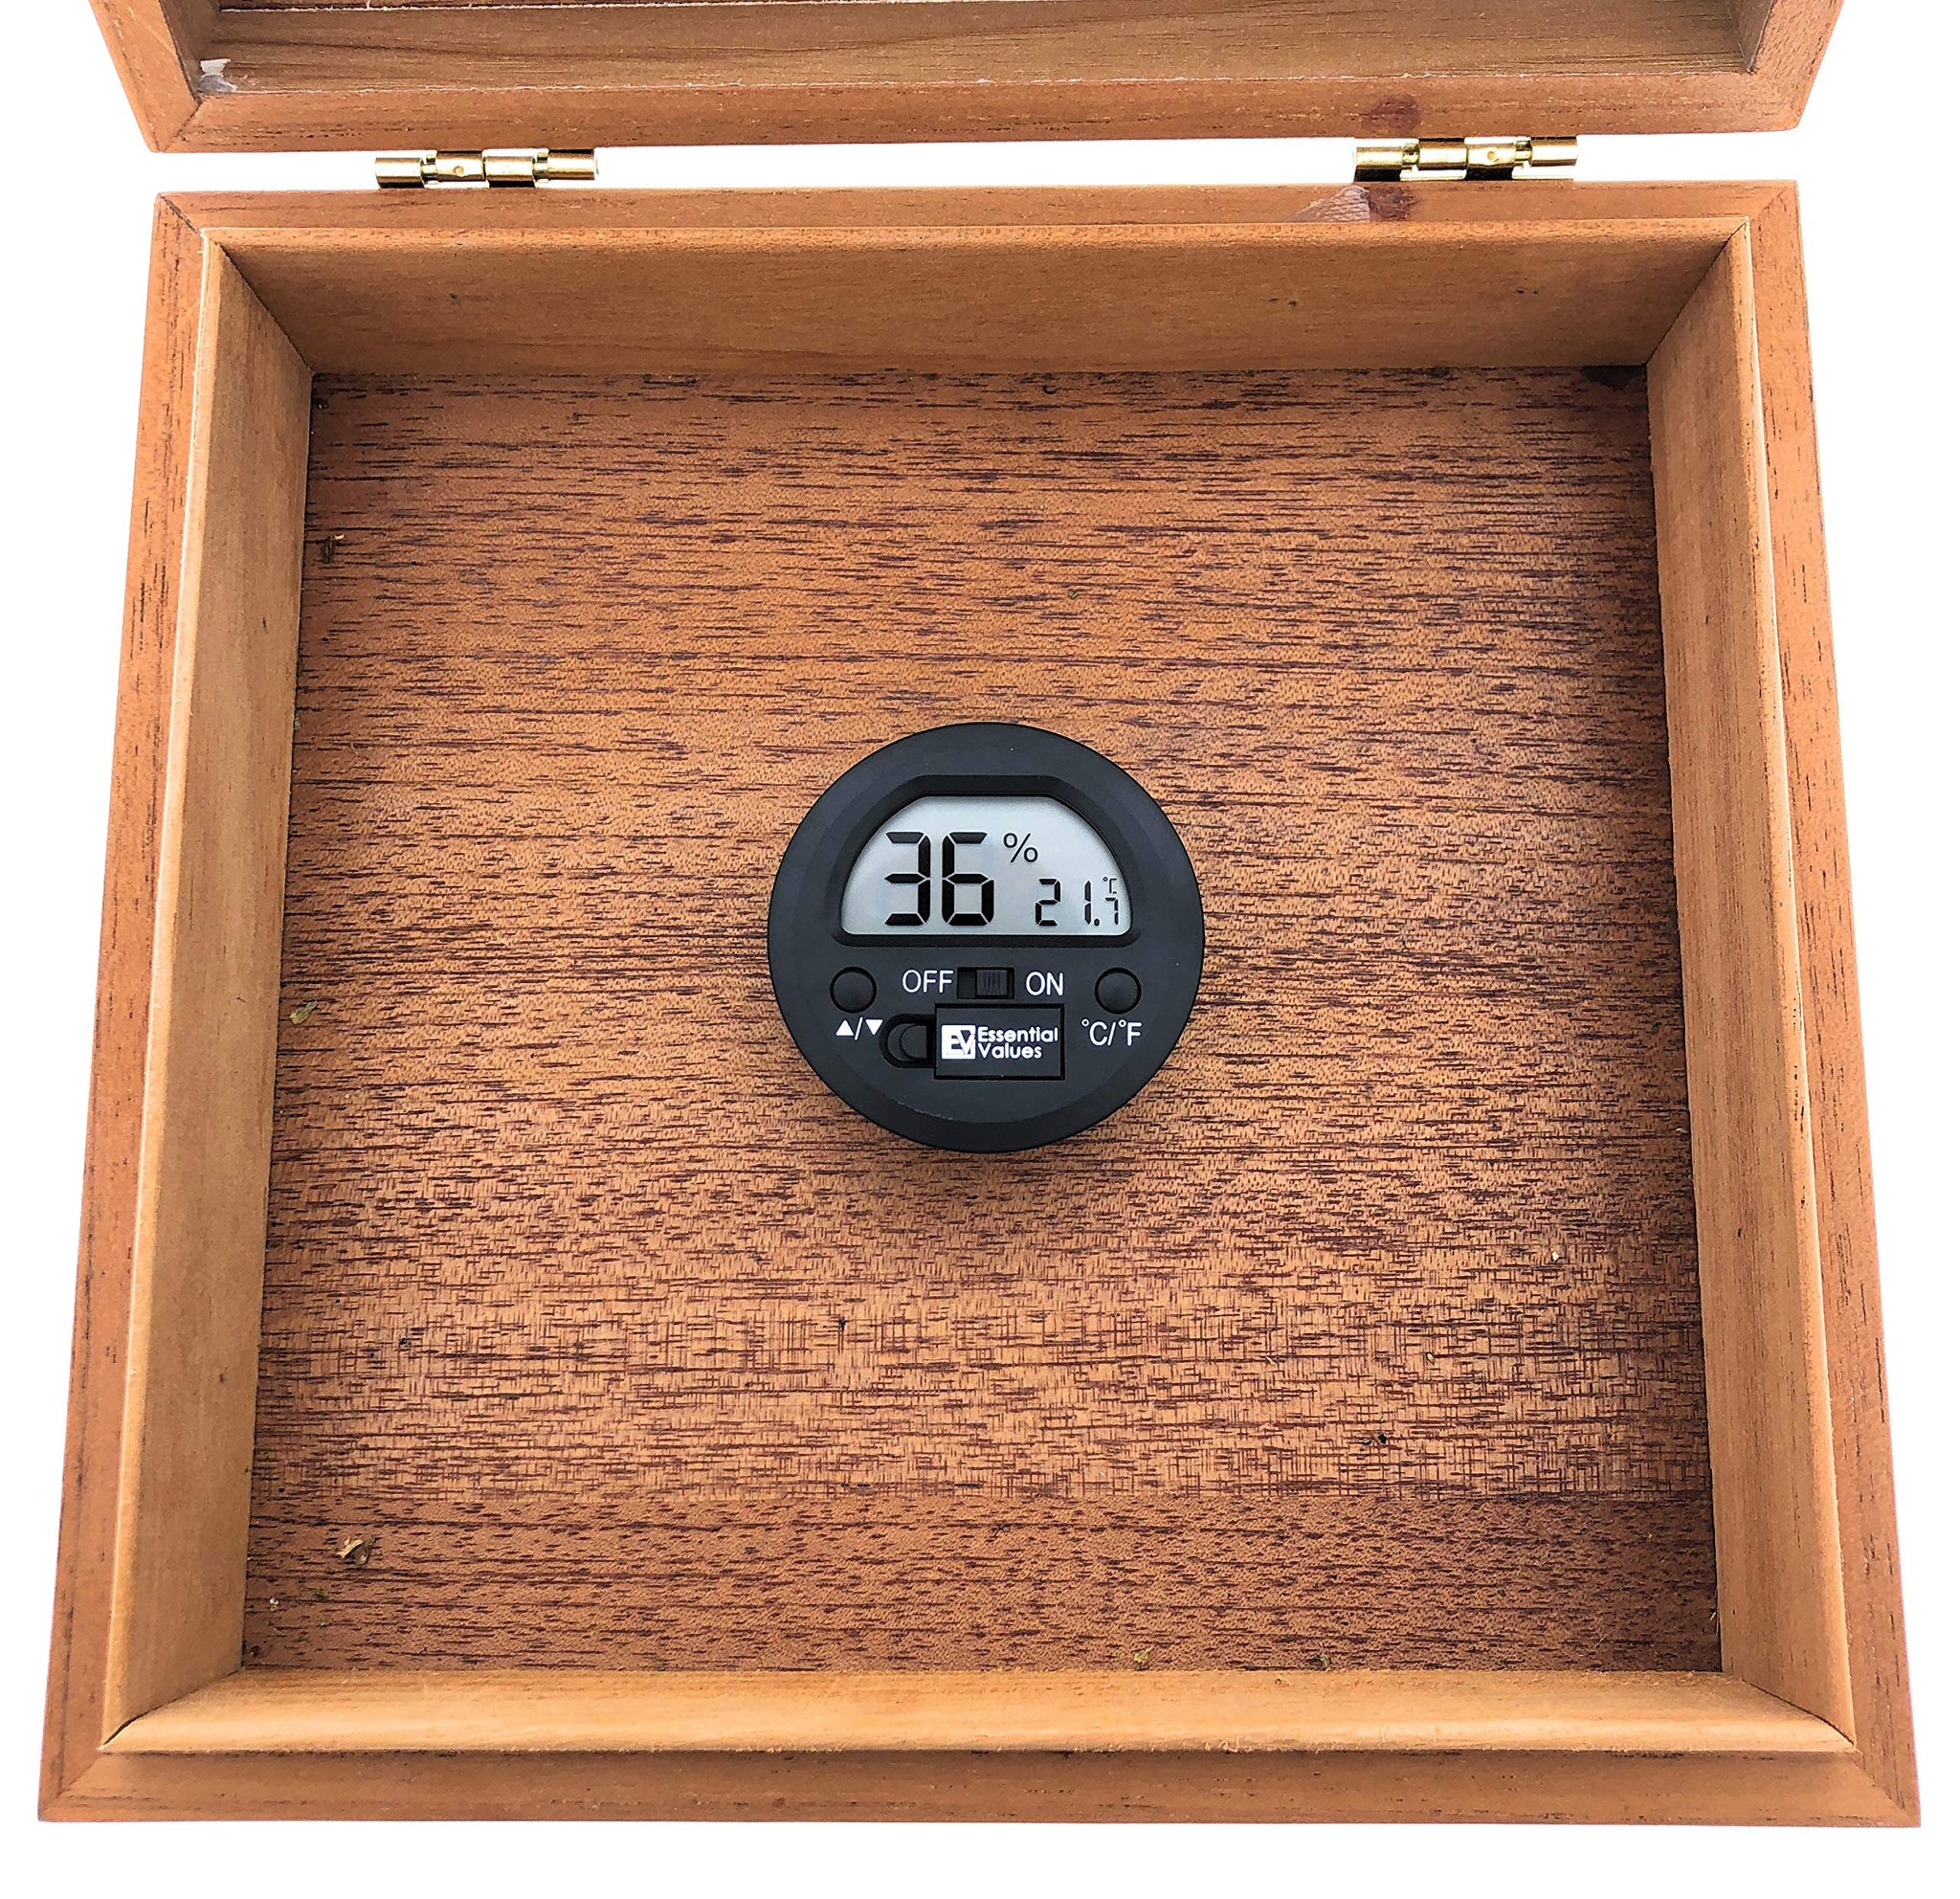 Digital Hygrometer Thermometer for Cigar Humidors